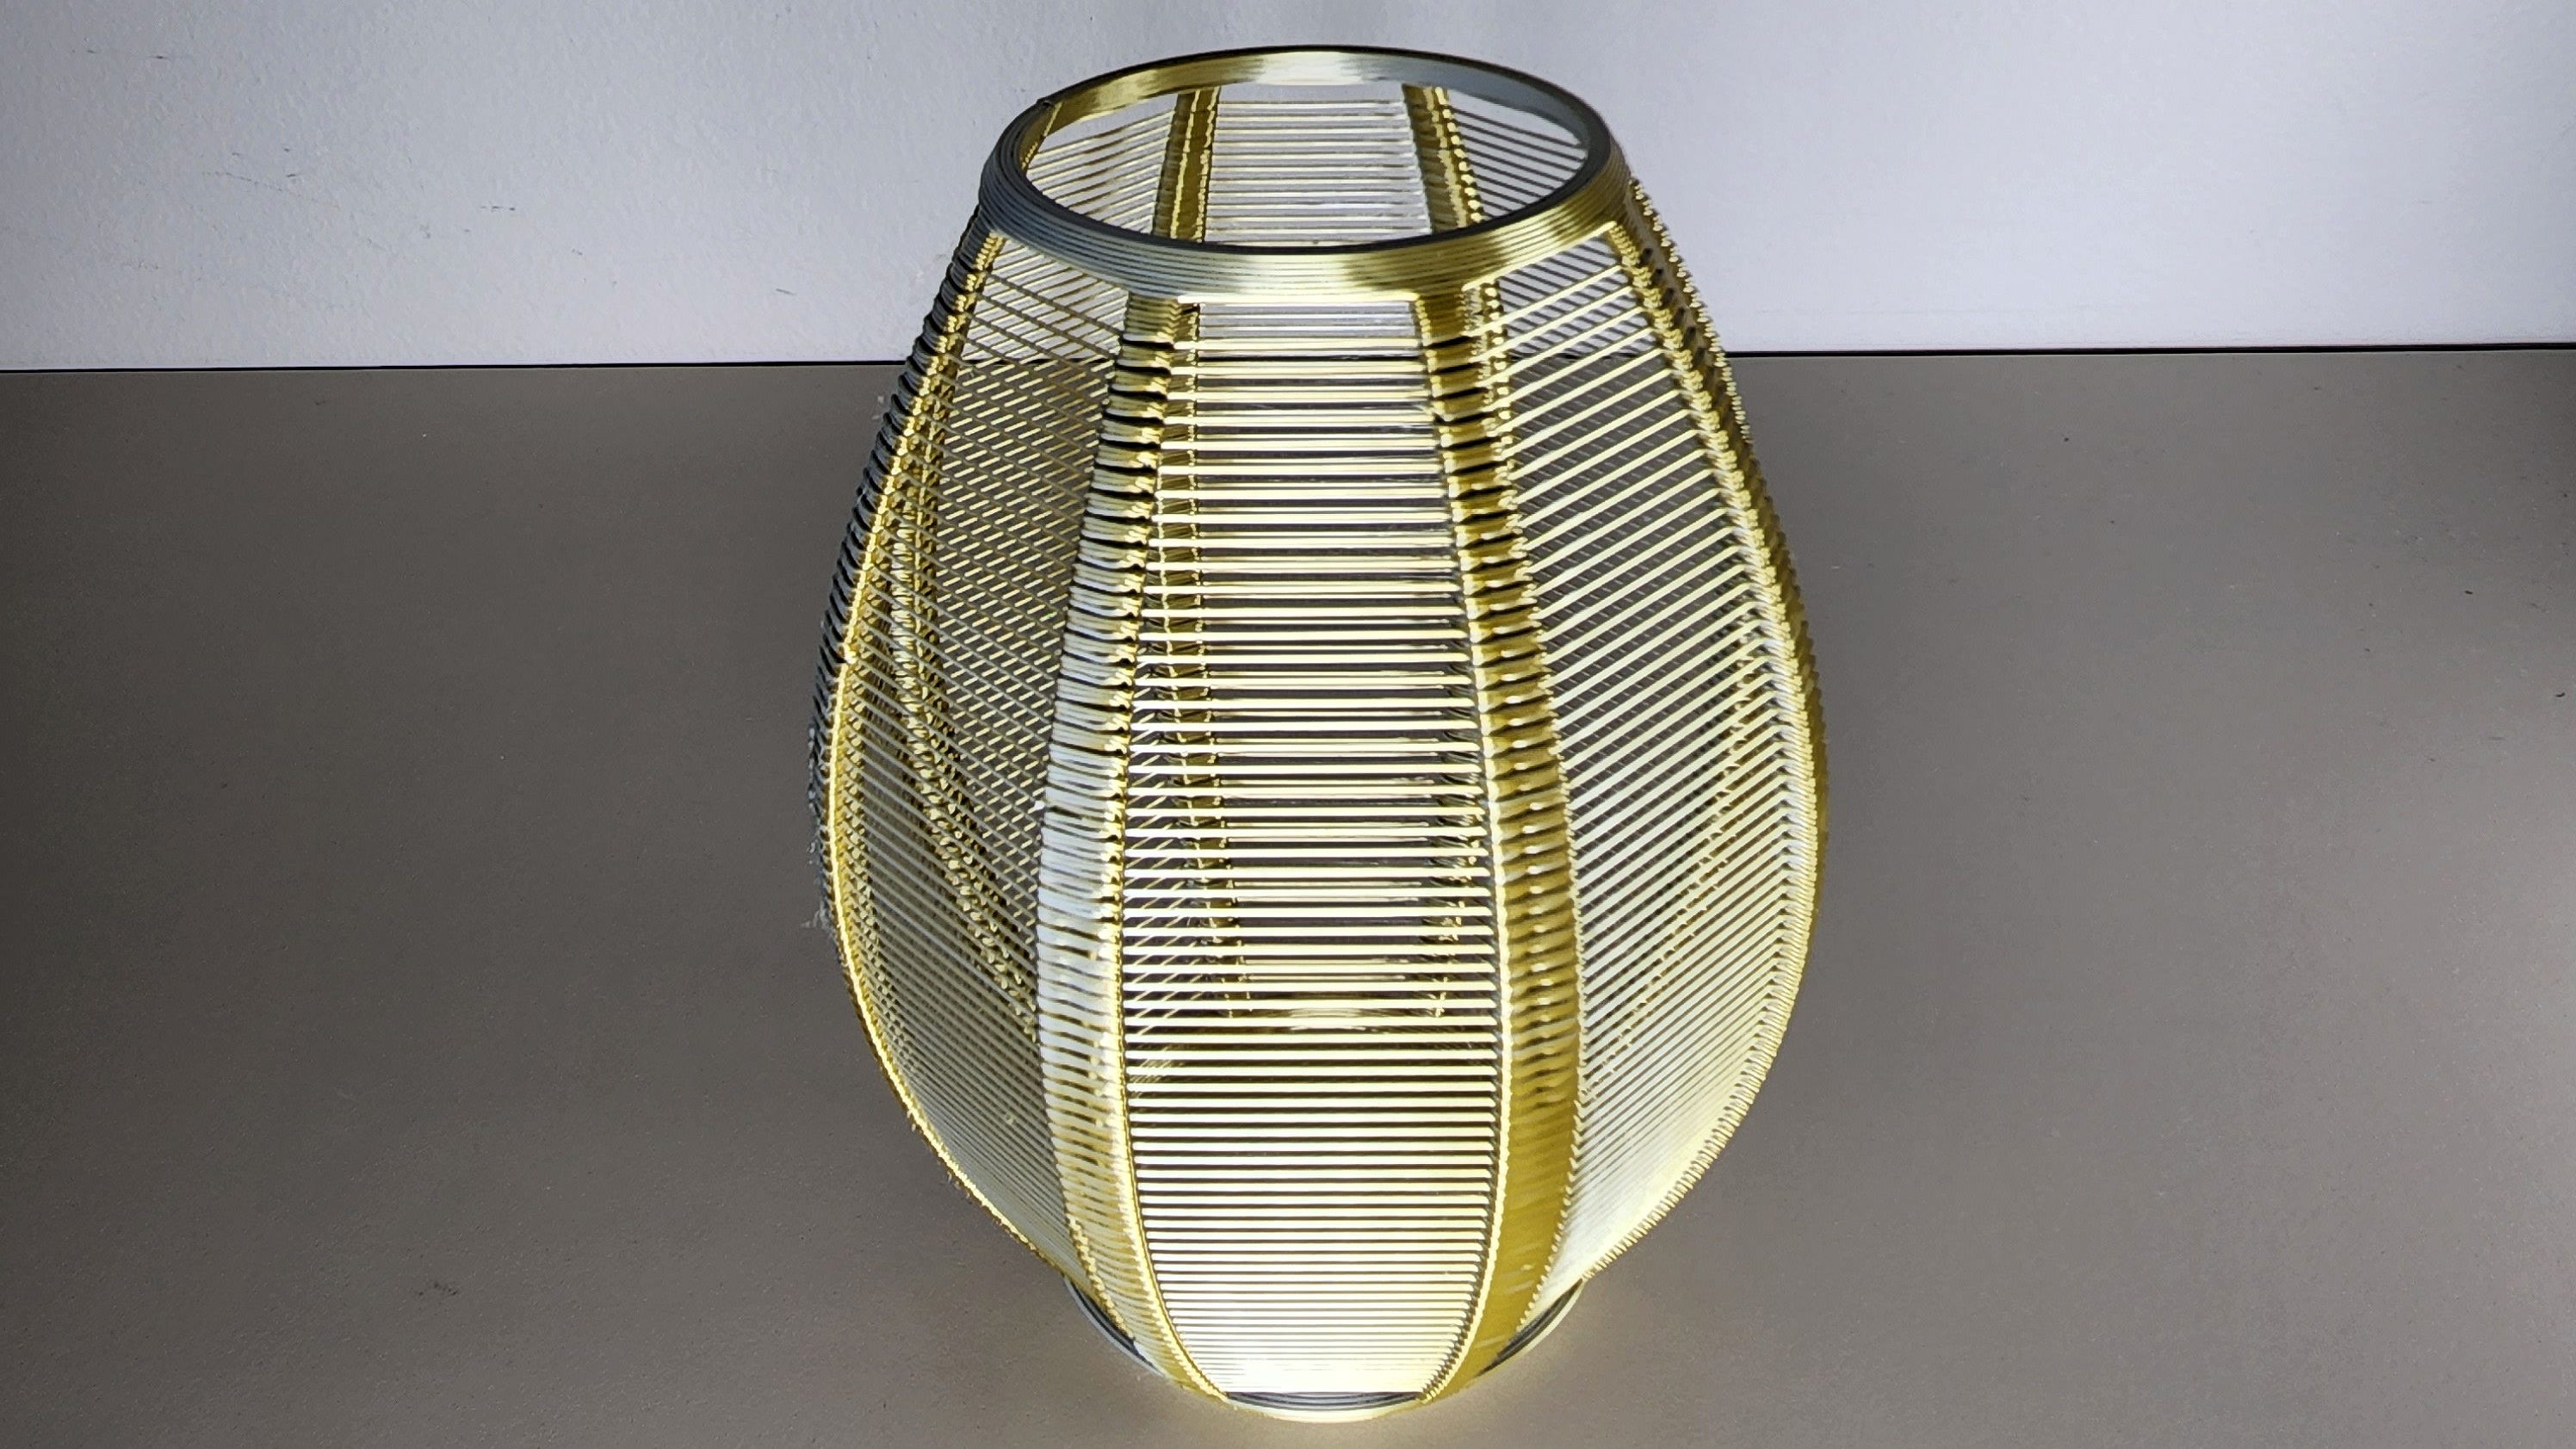 3D Printed String Vase Shows What's Possible